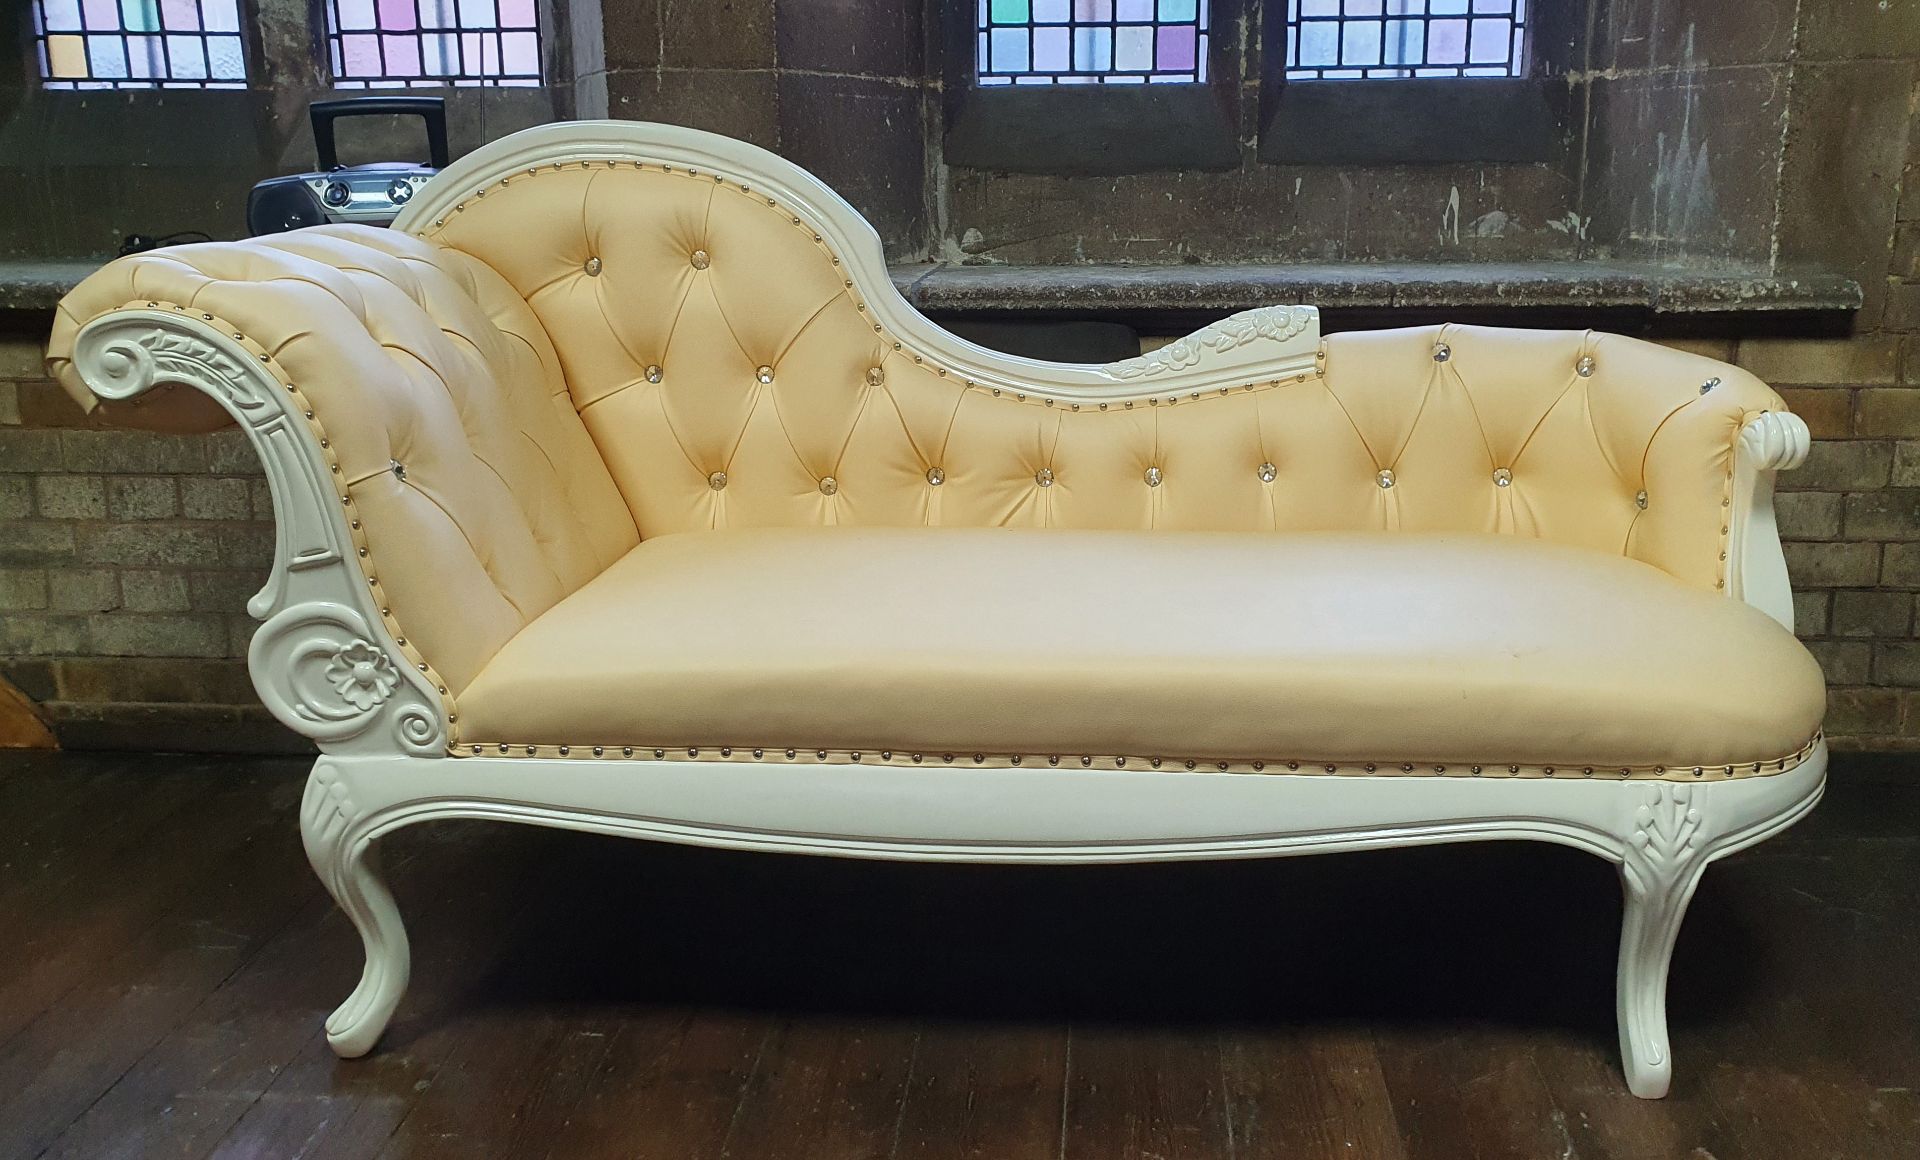 Classically Styled Chaise Longue Set Consisting Of Chaise Longue And Two Chairs - CL573 - - Image 2 of 2